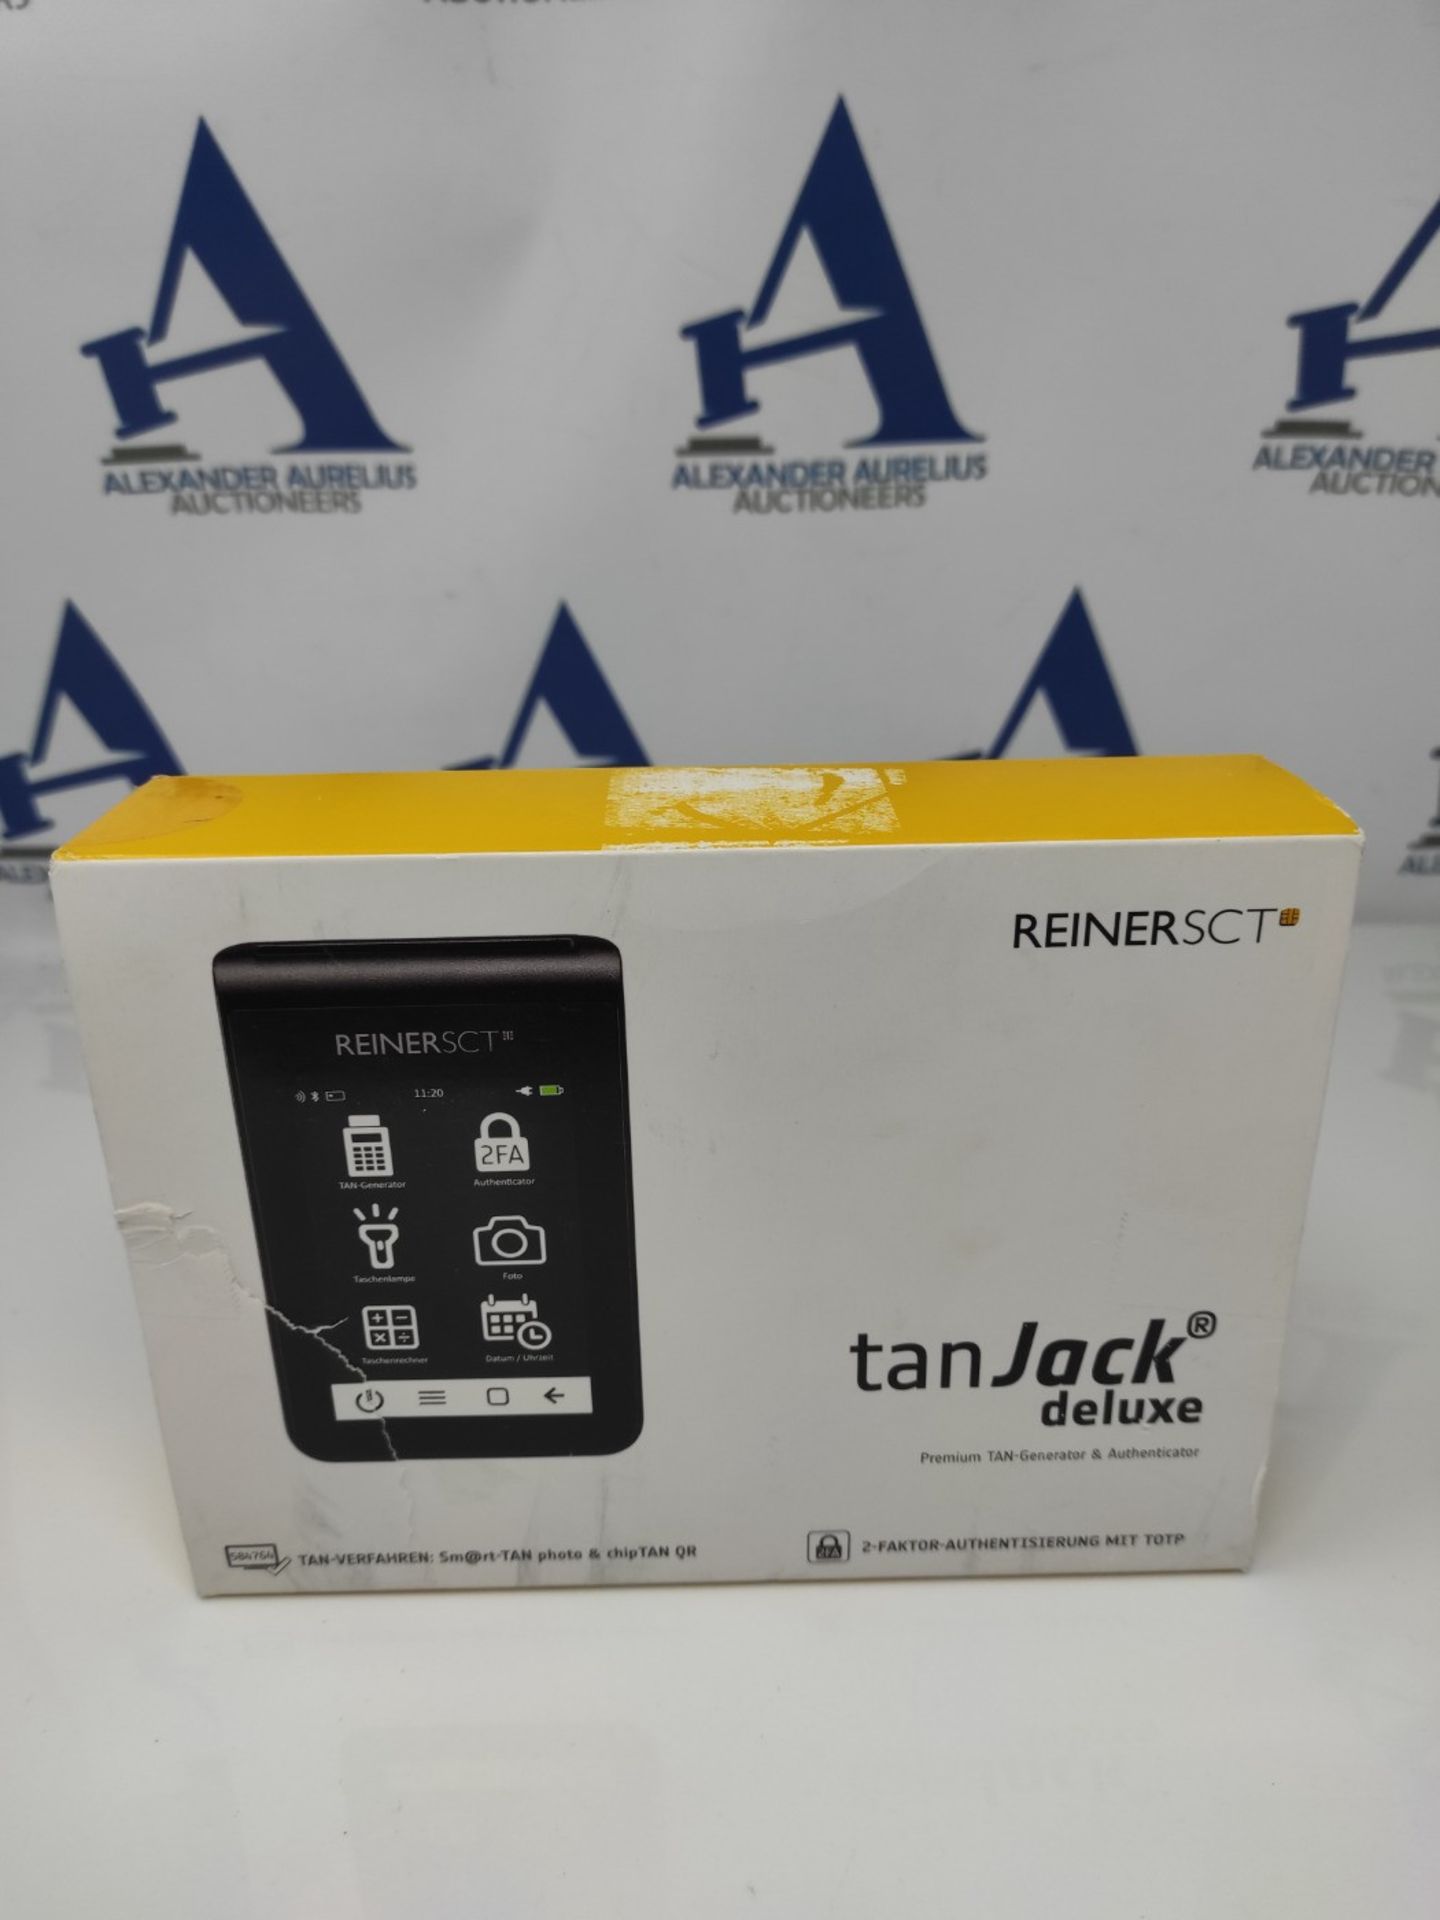 RRP £108.00 REINER SCT tanJack deluxe I Premium TAN generator and authenticator I First-class TAN - Image 2 of 3